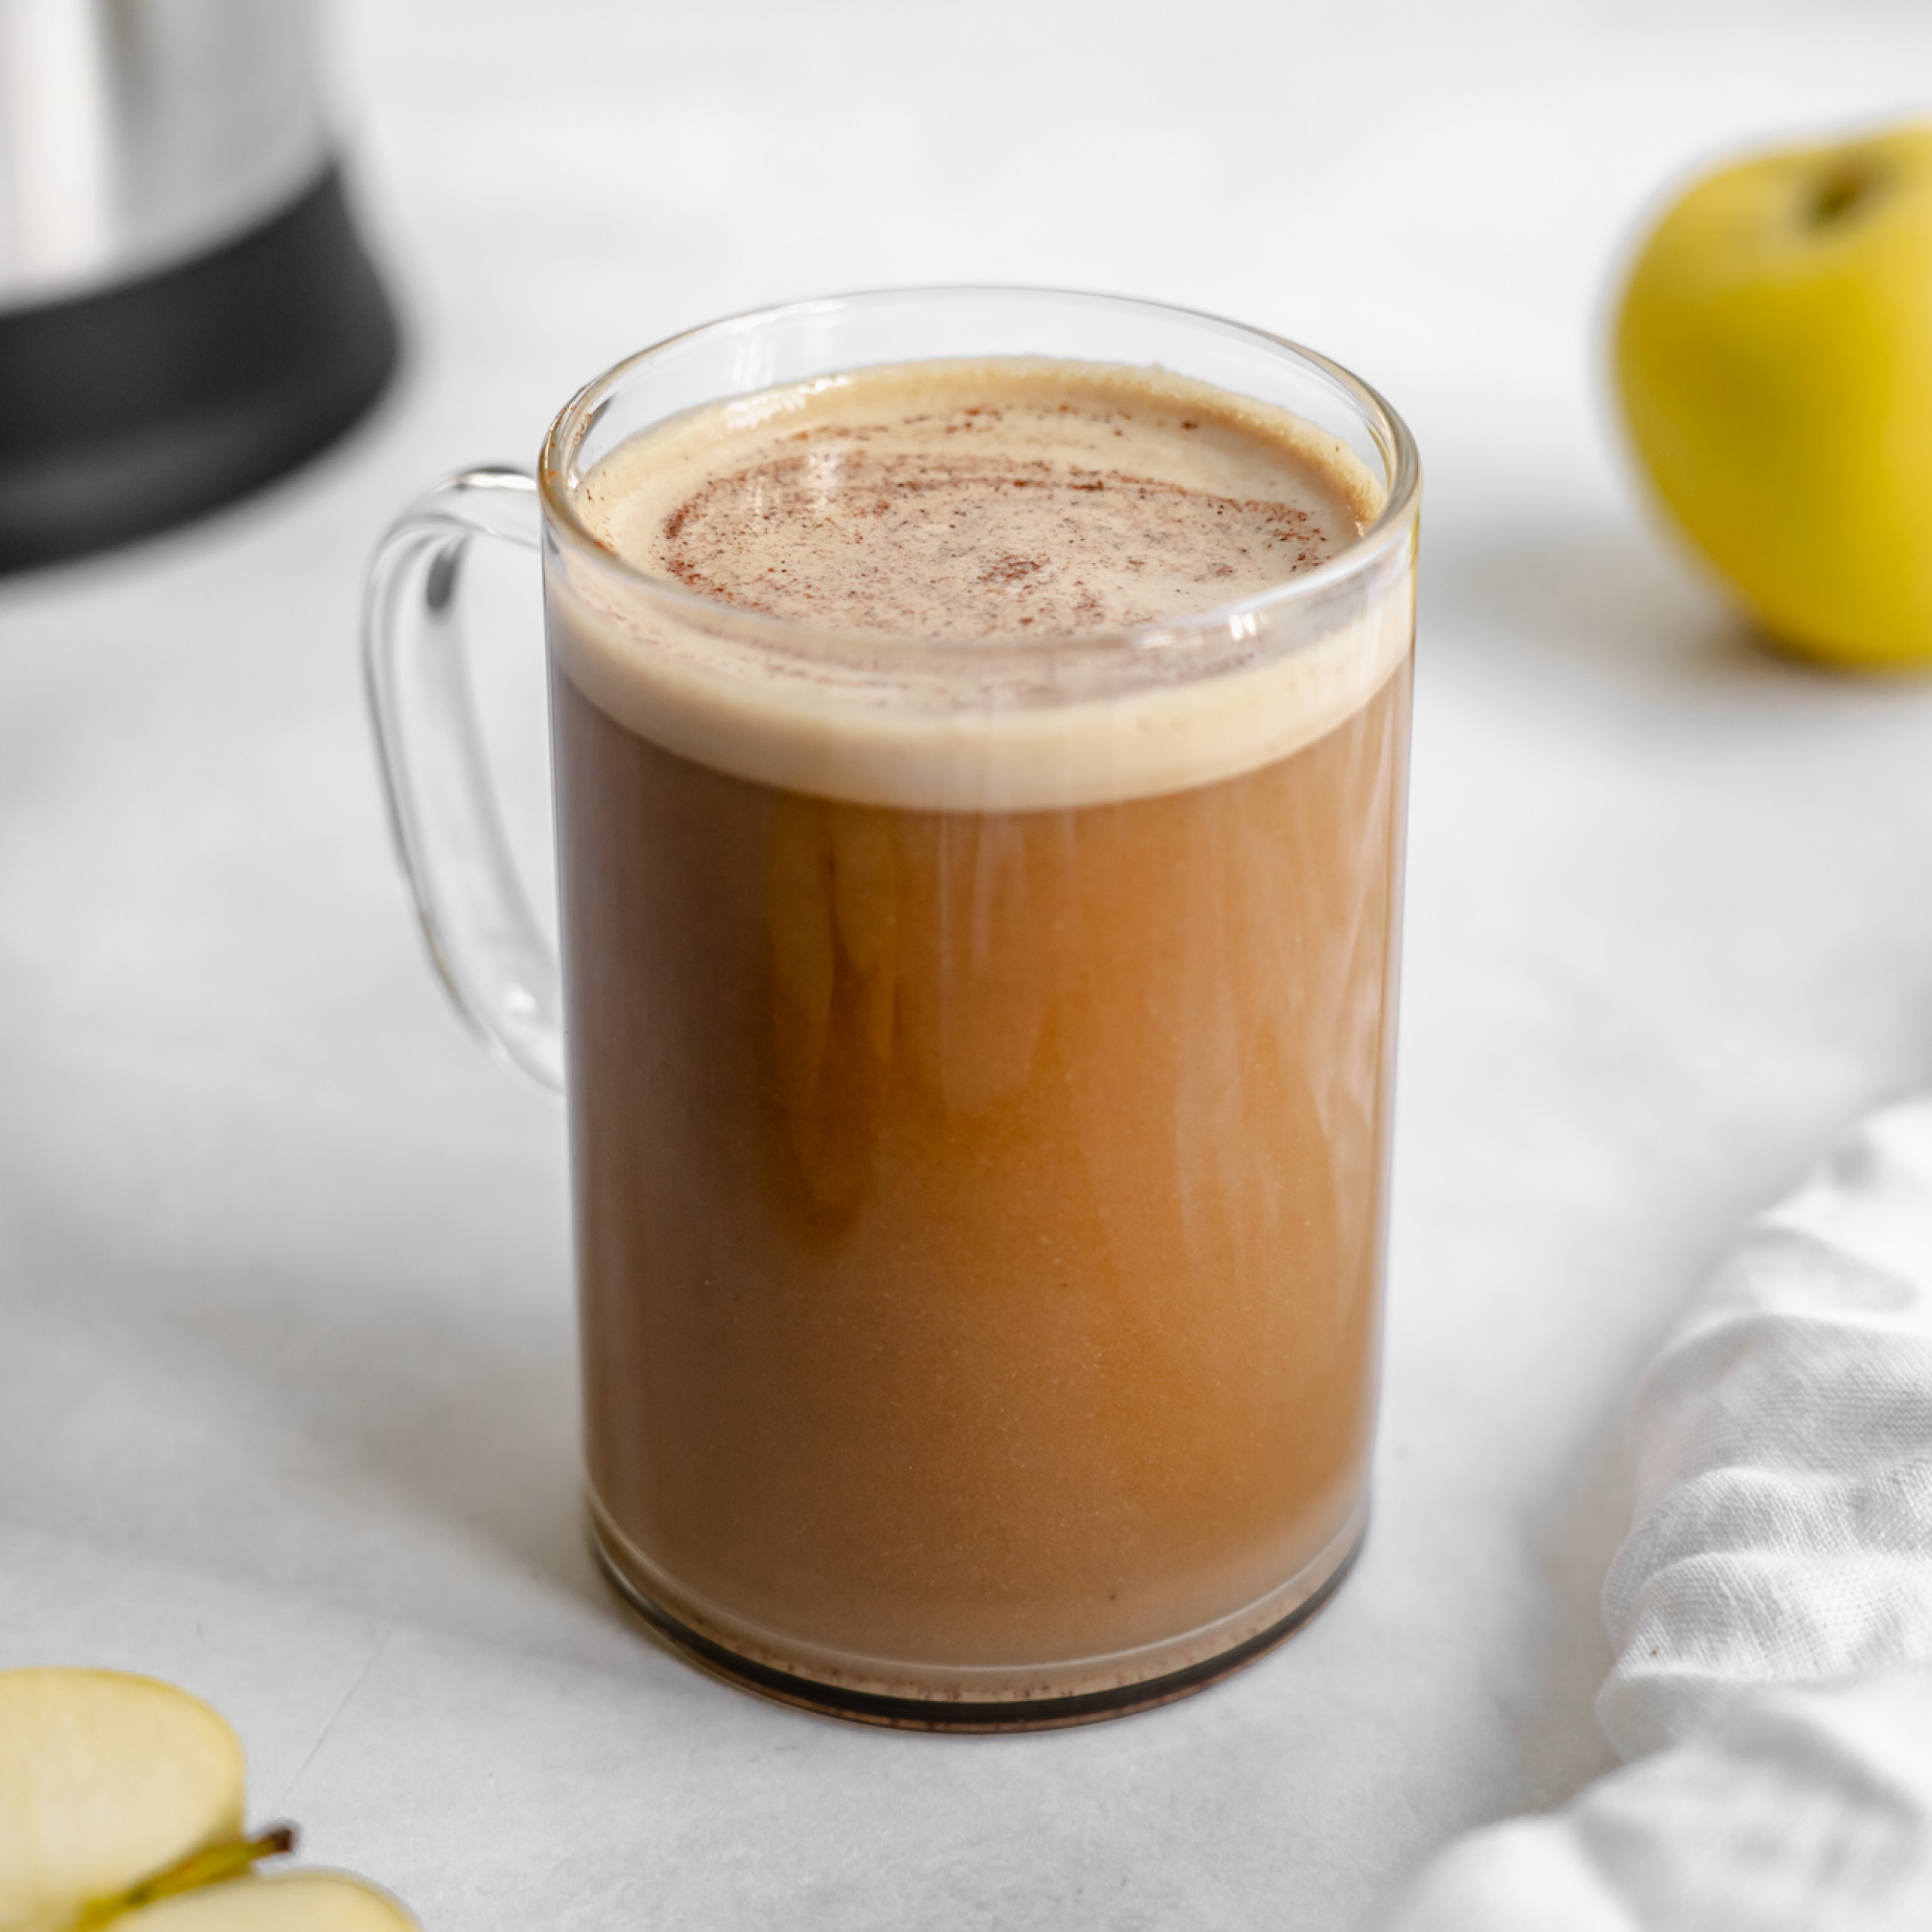 Warm, flavorful Apple Pie Latte made effortlessly with the Almond Cow machine